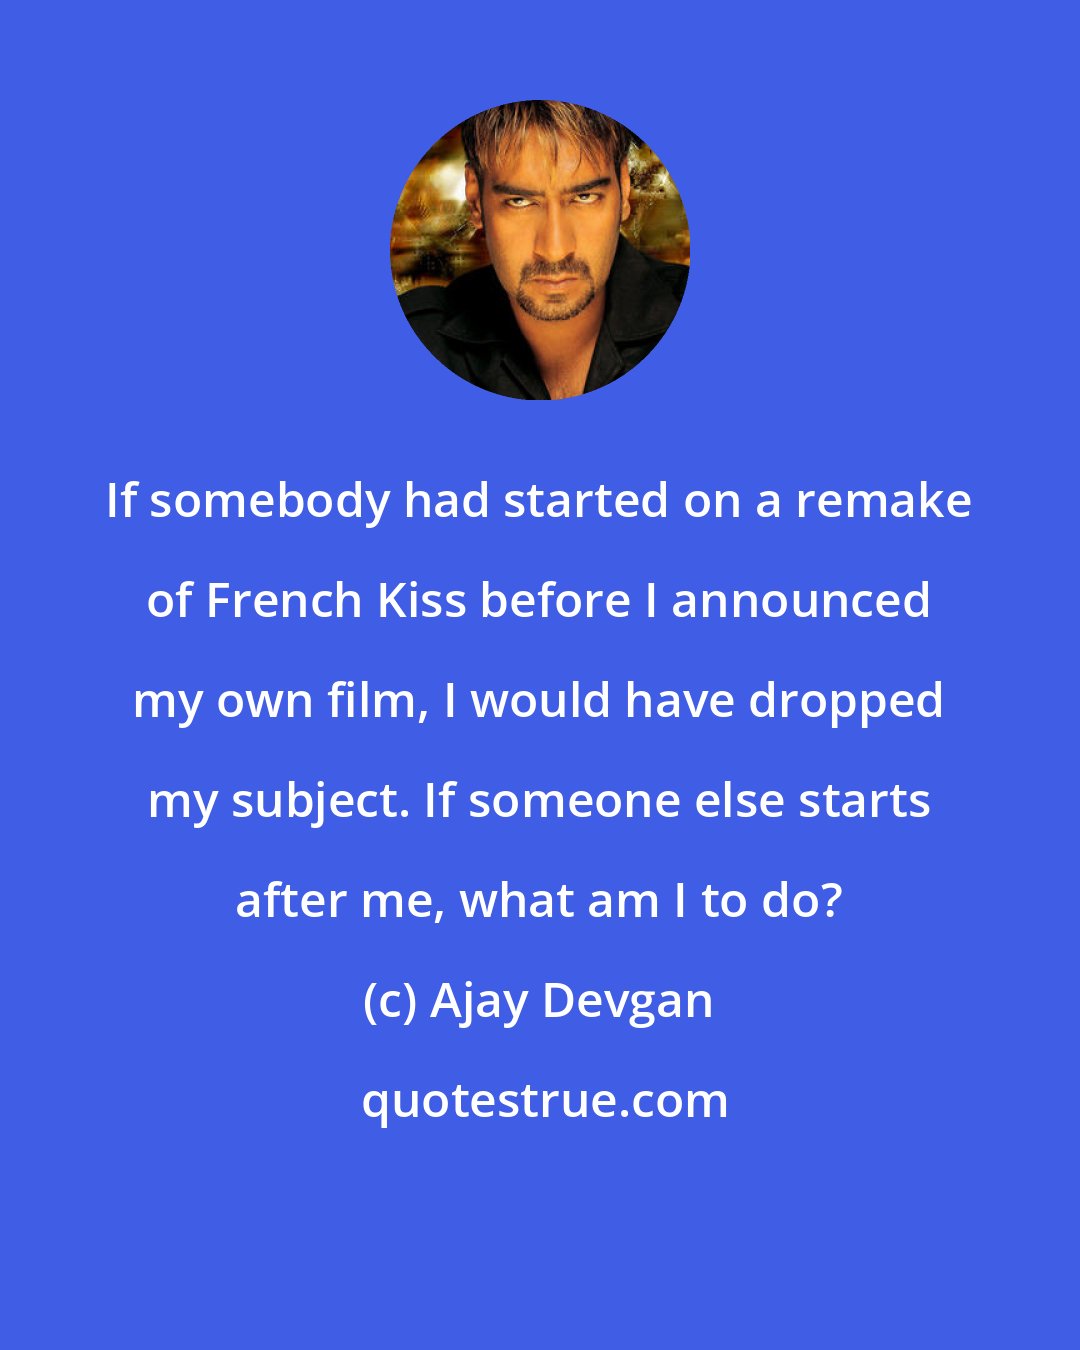 Ajay Devgan: If somebody had started on a remake of French Kiss before I announced my own film, I would have dropped my subject. If someone else starts after me, what am I to do?